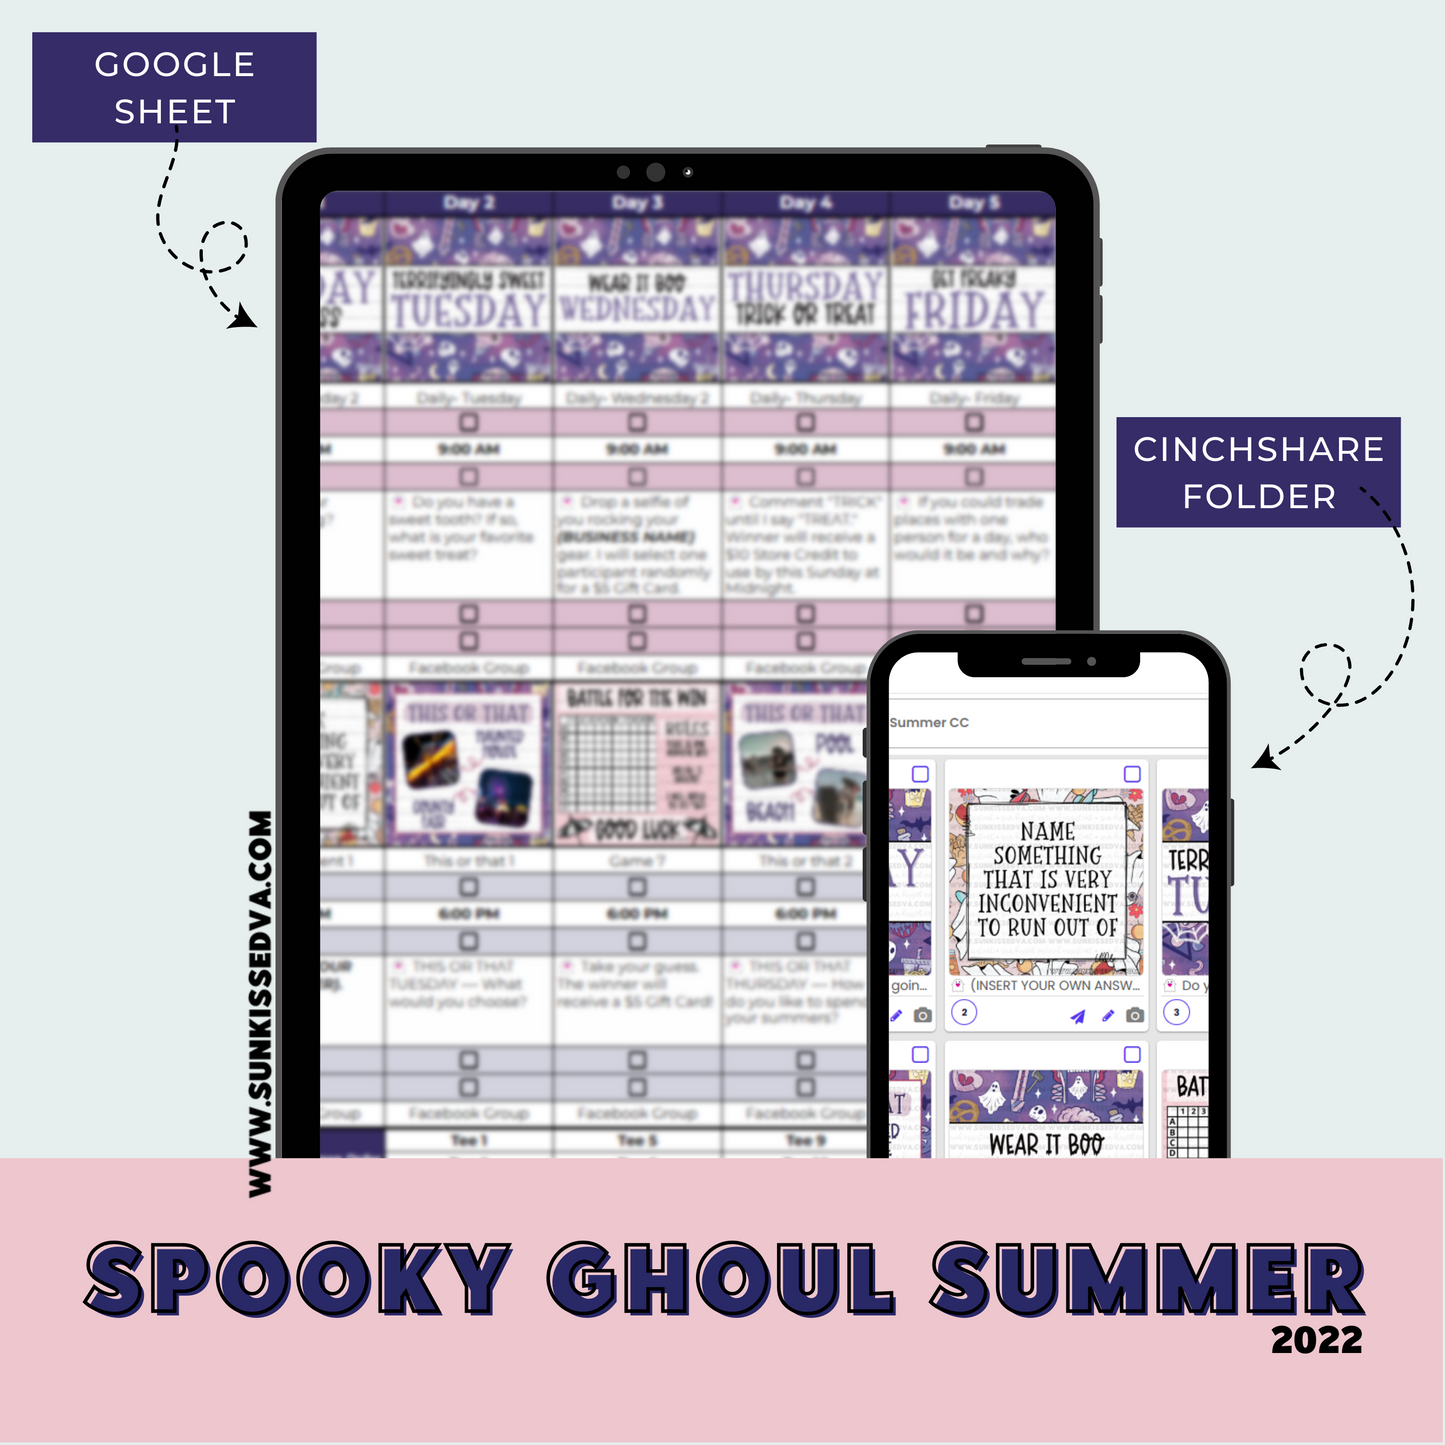 Spooky Ghoul Summer Content Calendar themed social media plan | Sun Kissed Virtual Assistant